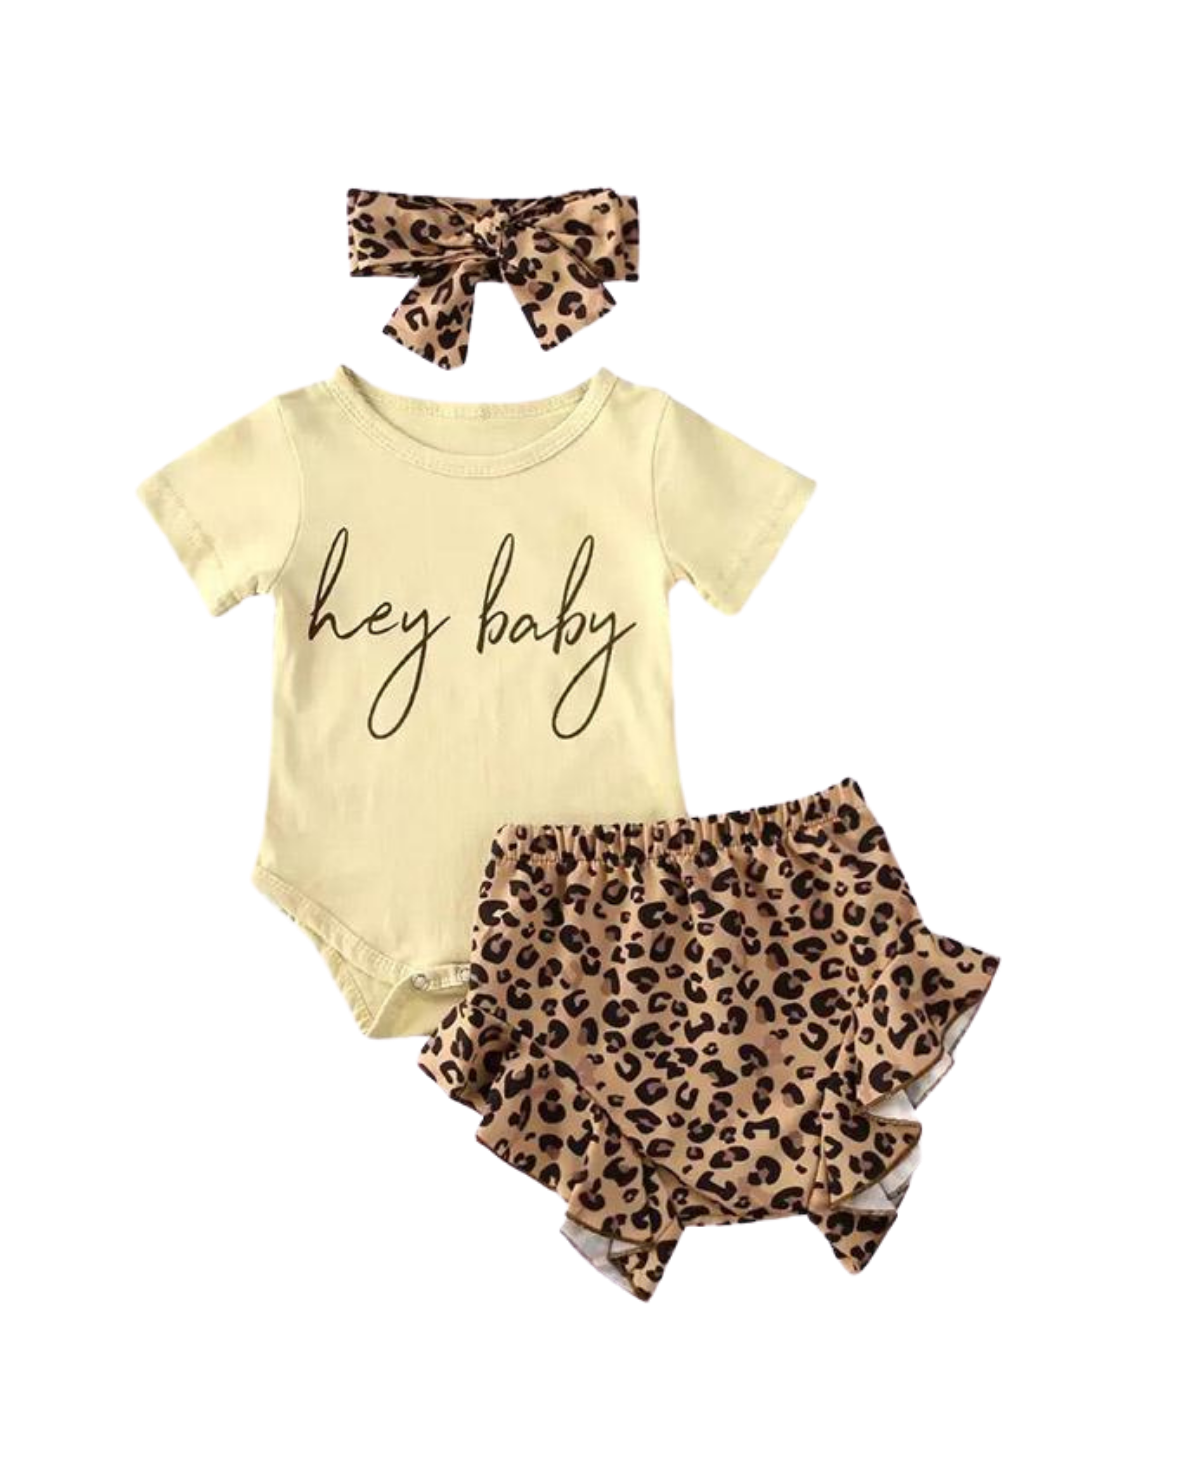 "Hey Baby" Girl Outfit